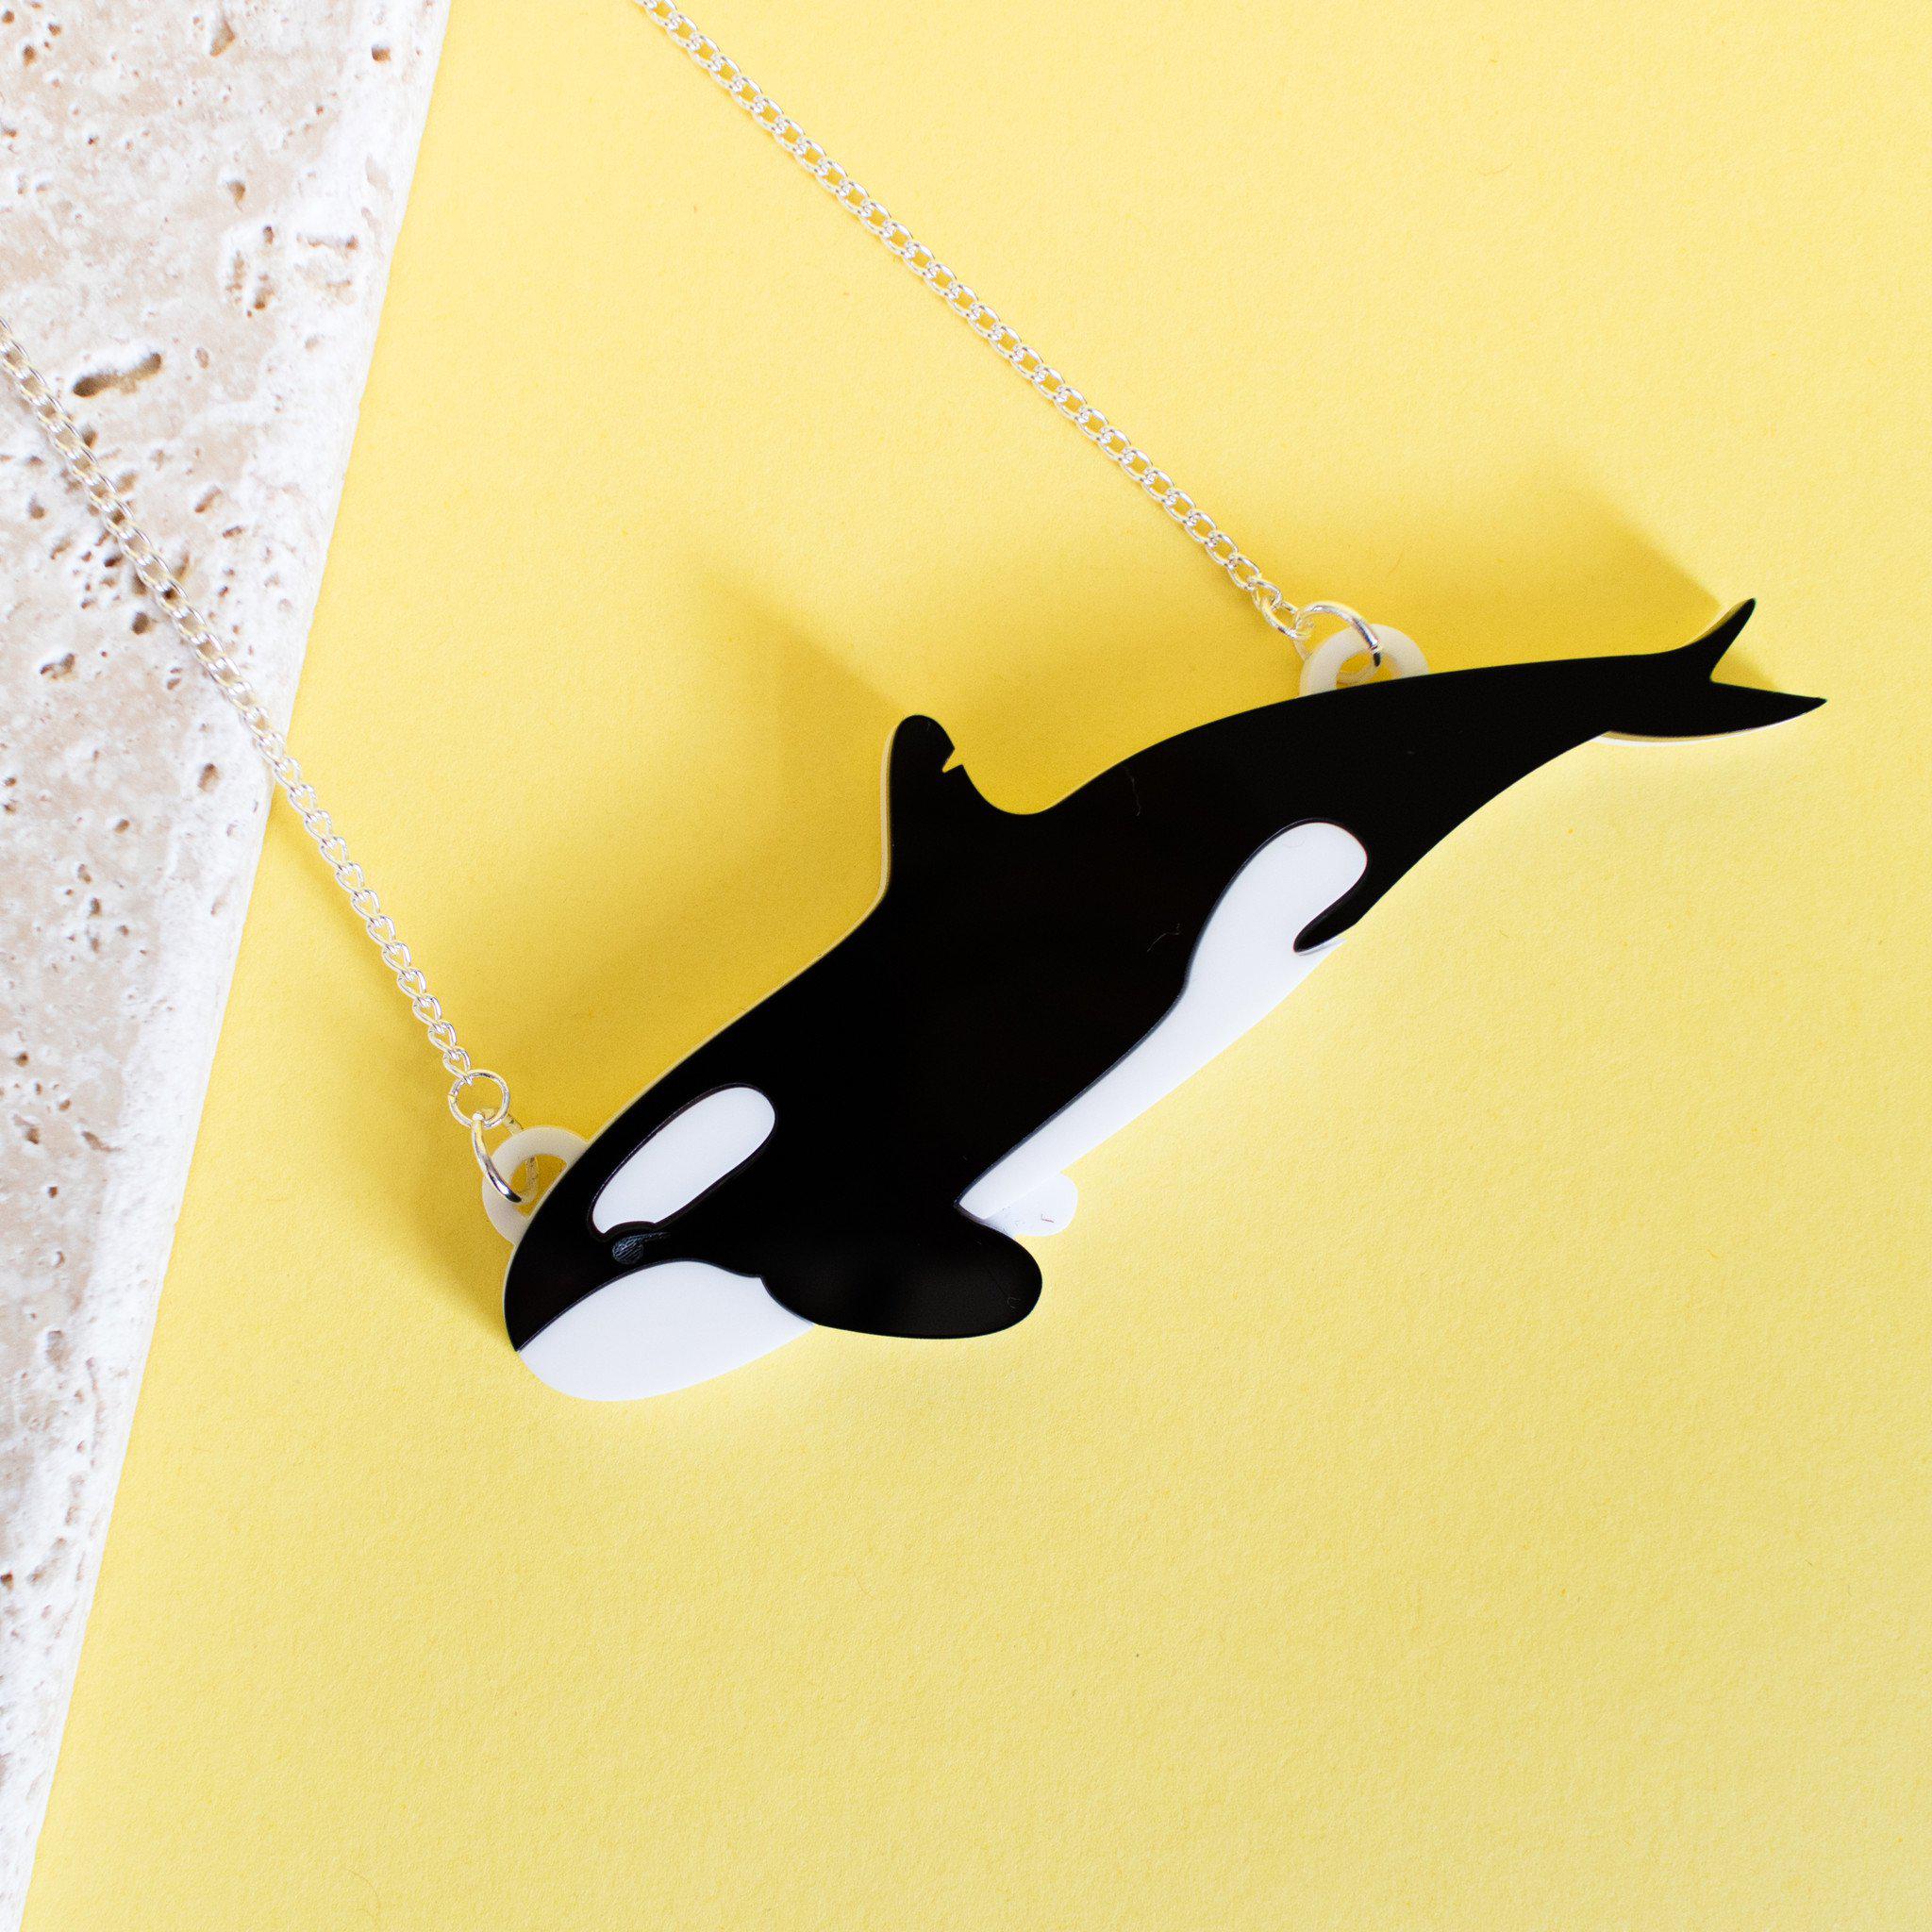 Orca Necklace - Finest Imaginary